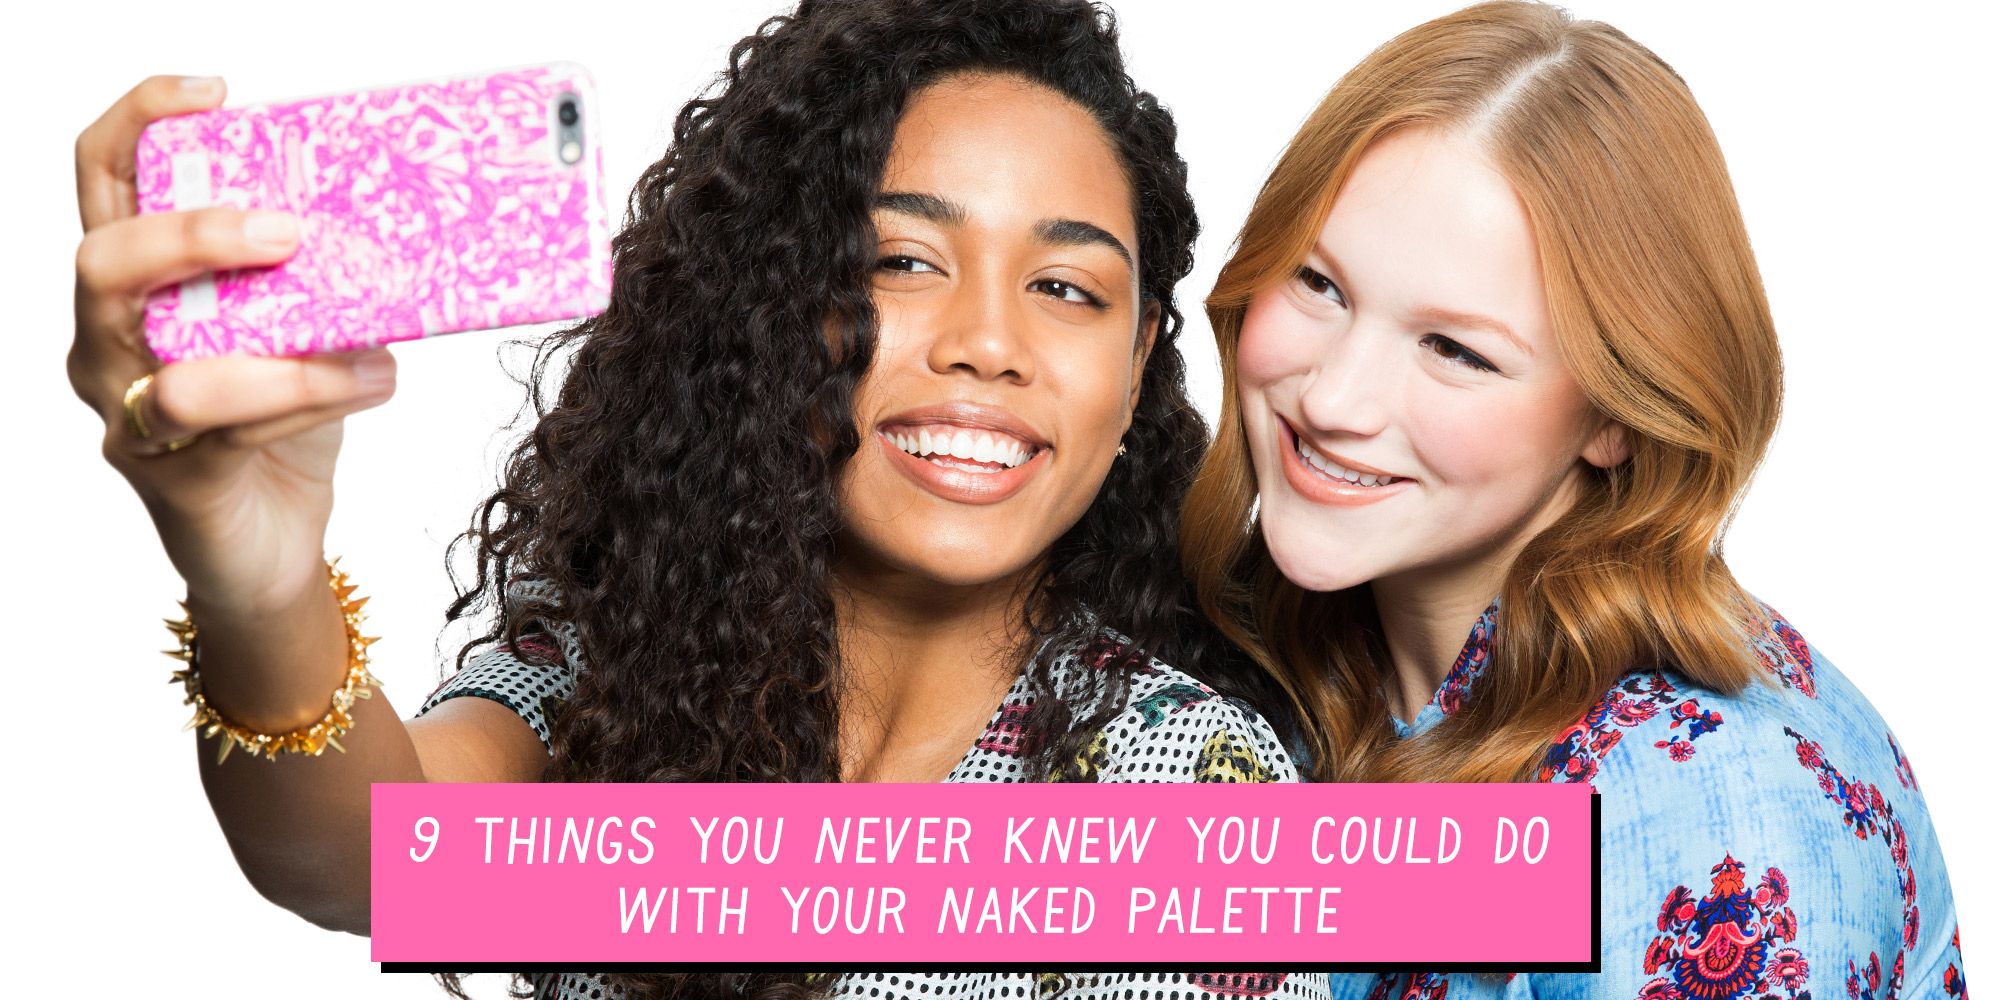 9 Things You Didn't Know You Could Do With Your Naked Palette